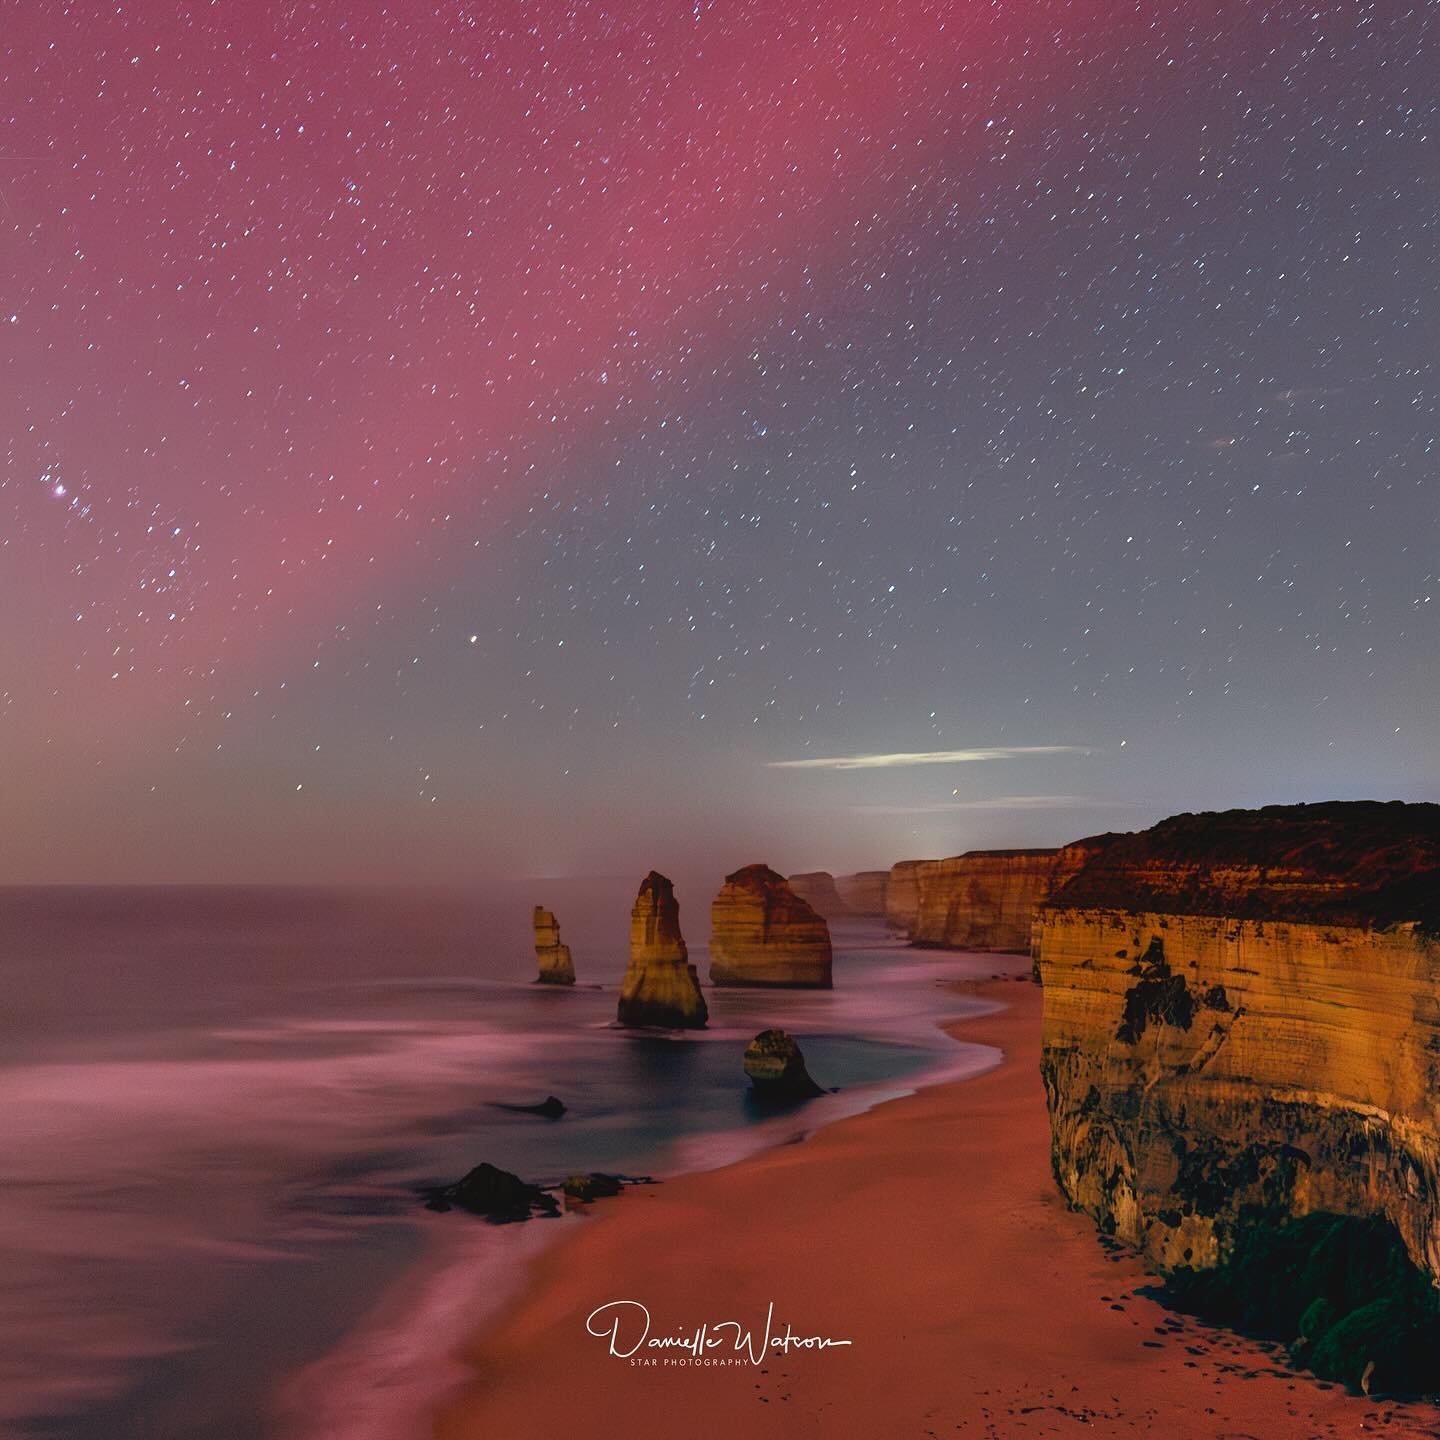 Under the celestial ballet of the most vivid aurora storm in 22 years, I stood at the precipice of natural wonder, the Twelve Apostles. It was a night where the skies seemed to unravel their mysteries, painting the sky in strokes of green, purple, an